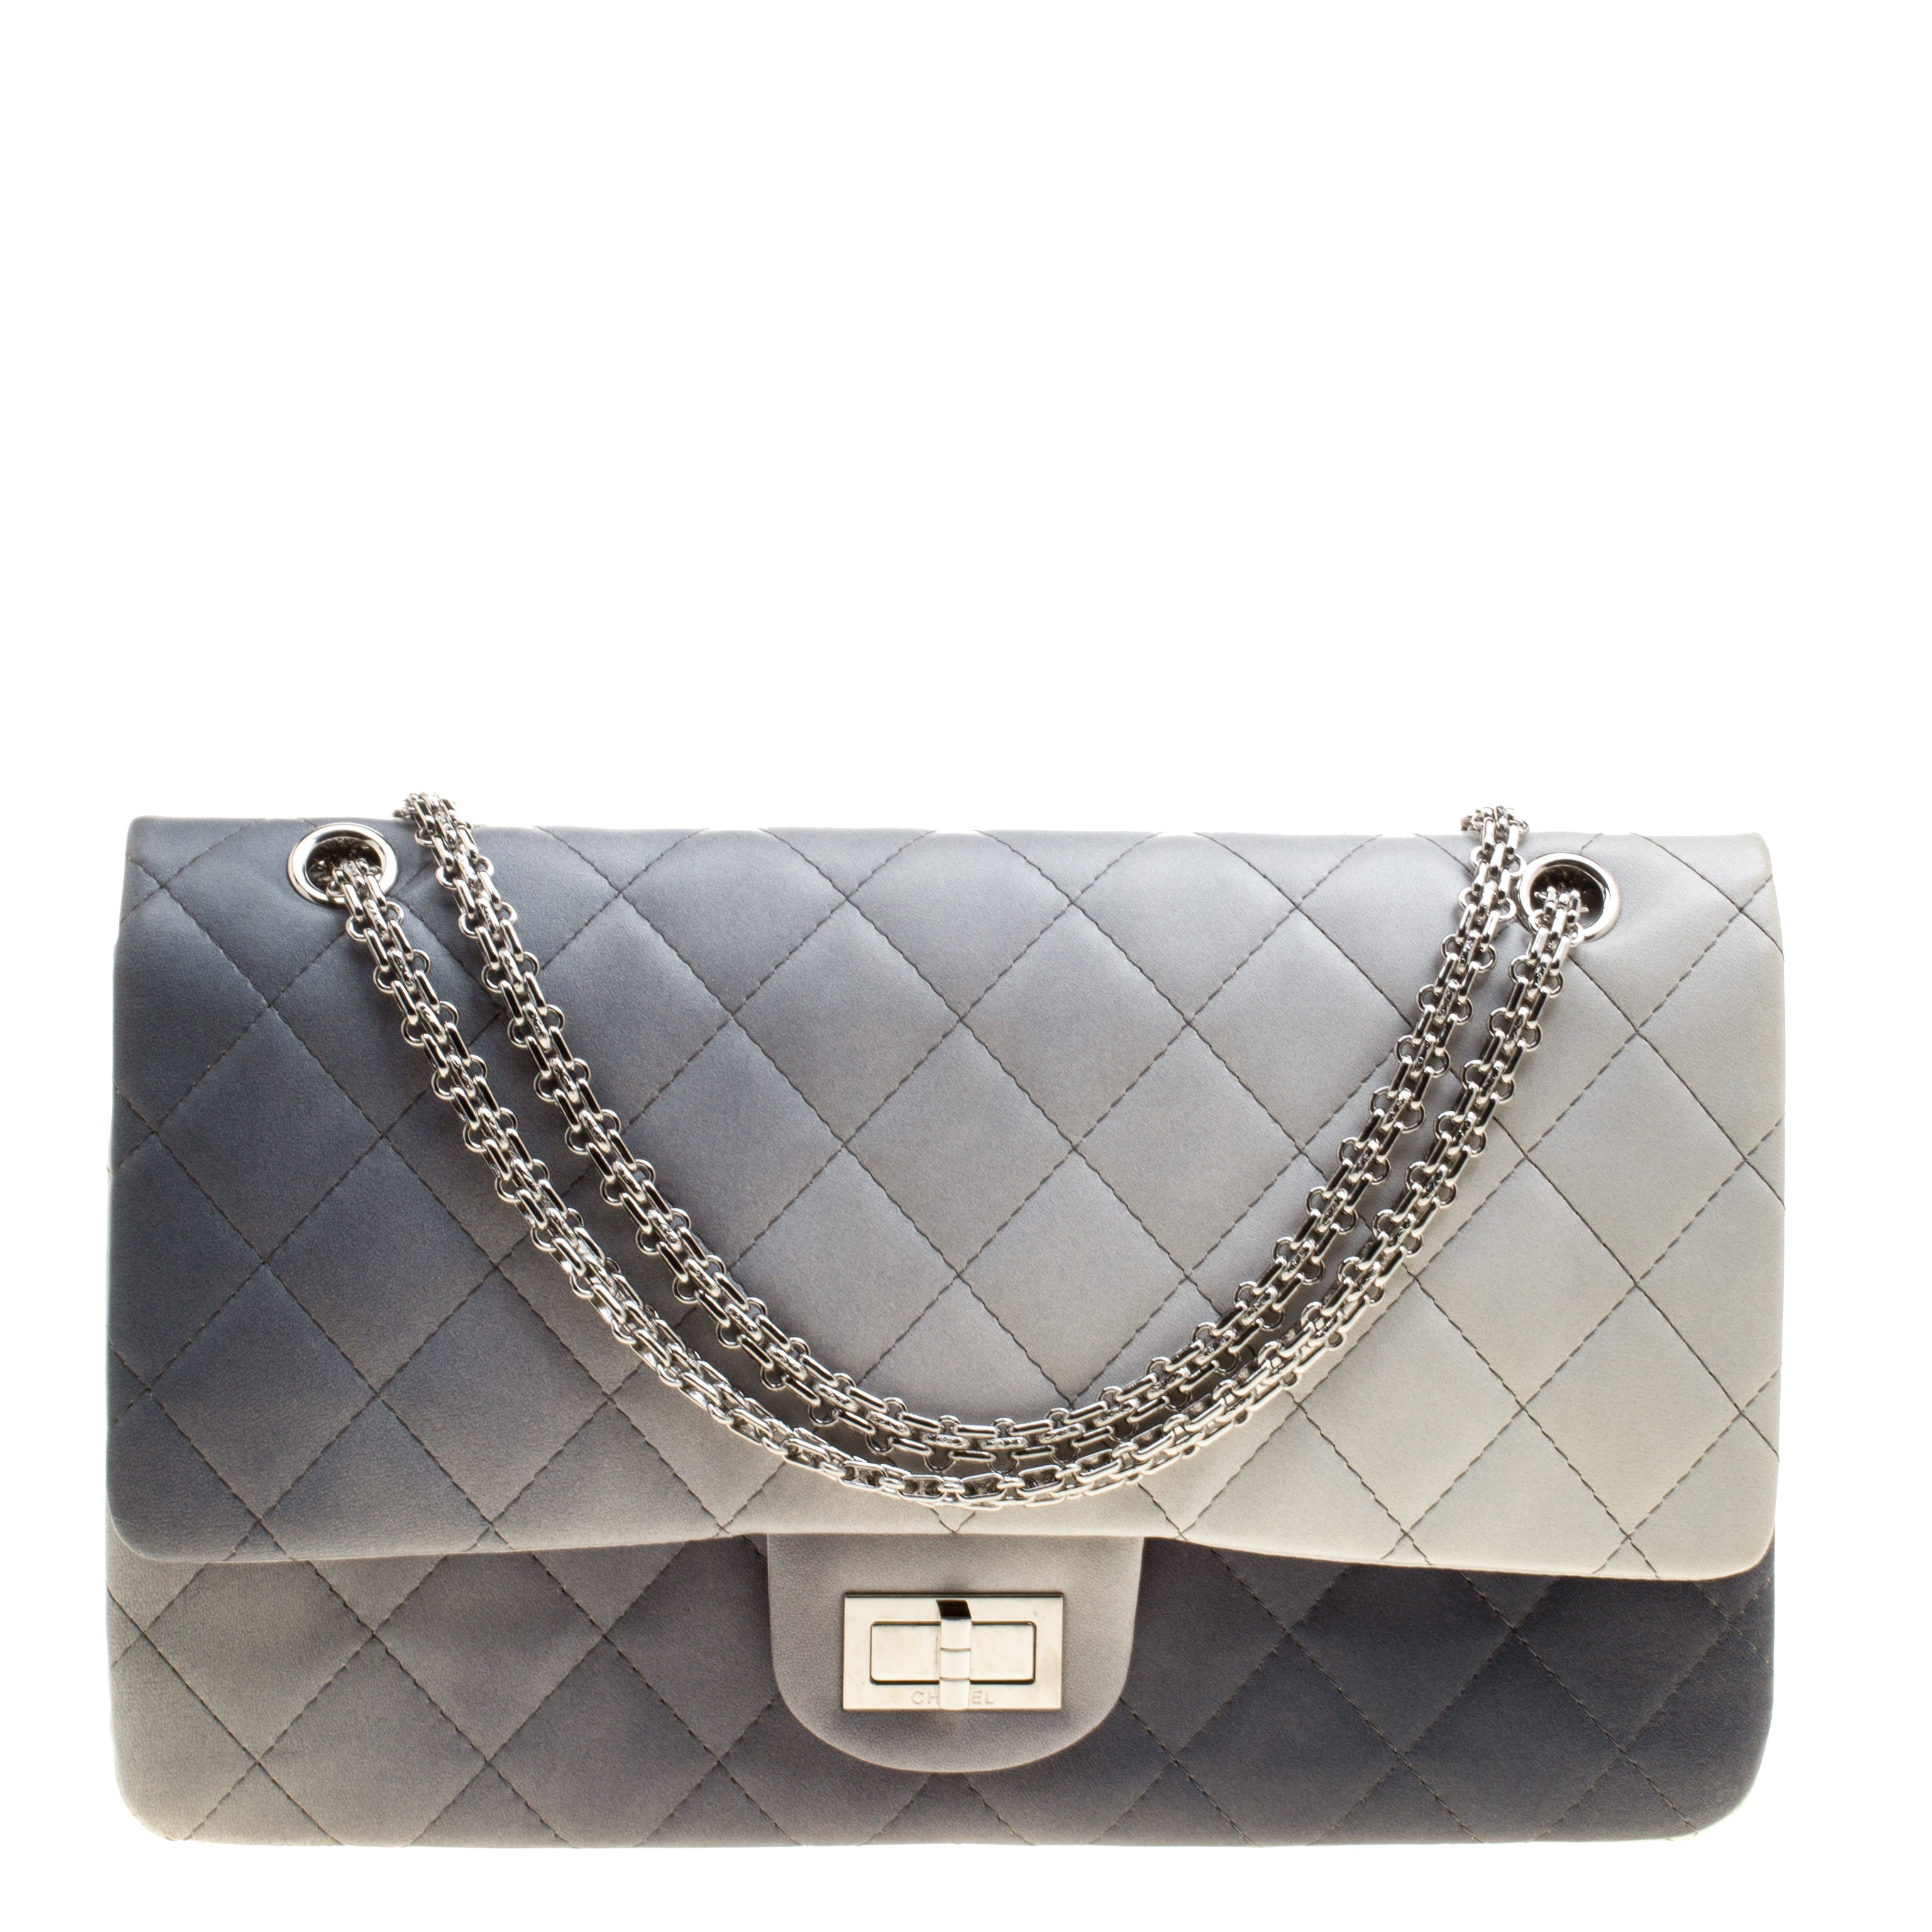 Chanel Multicolor Quilted Leather Reissue 2.55 Classic 227 Flap Bag ...